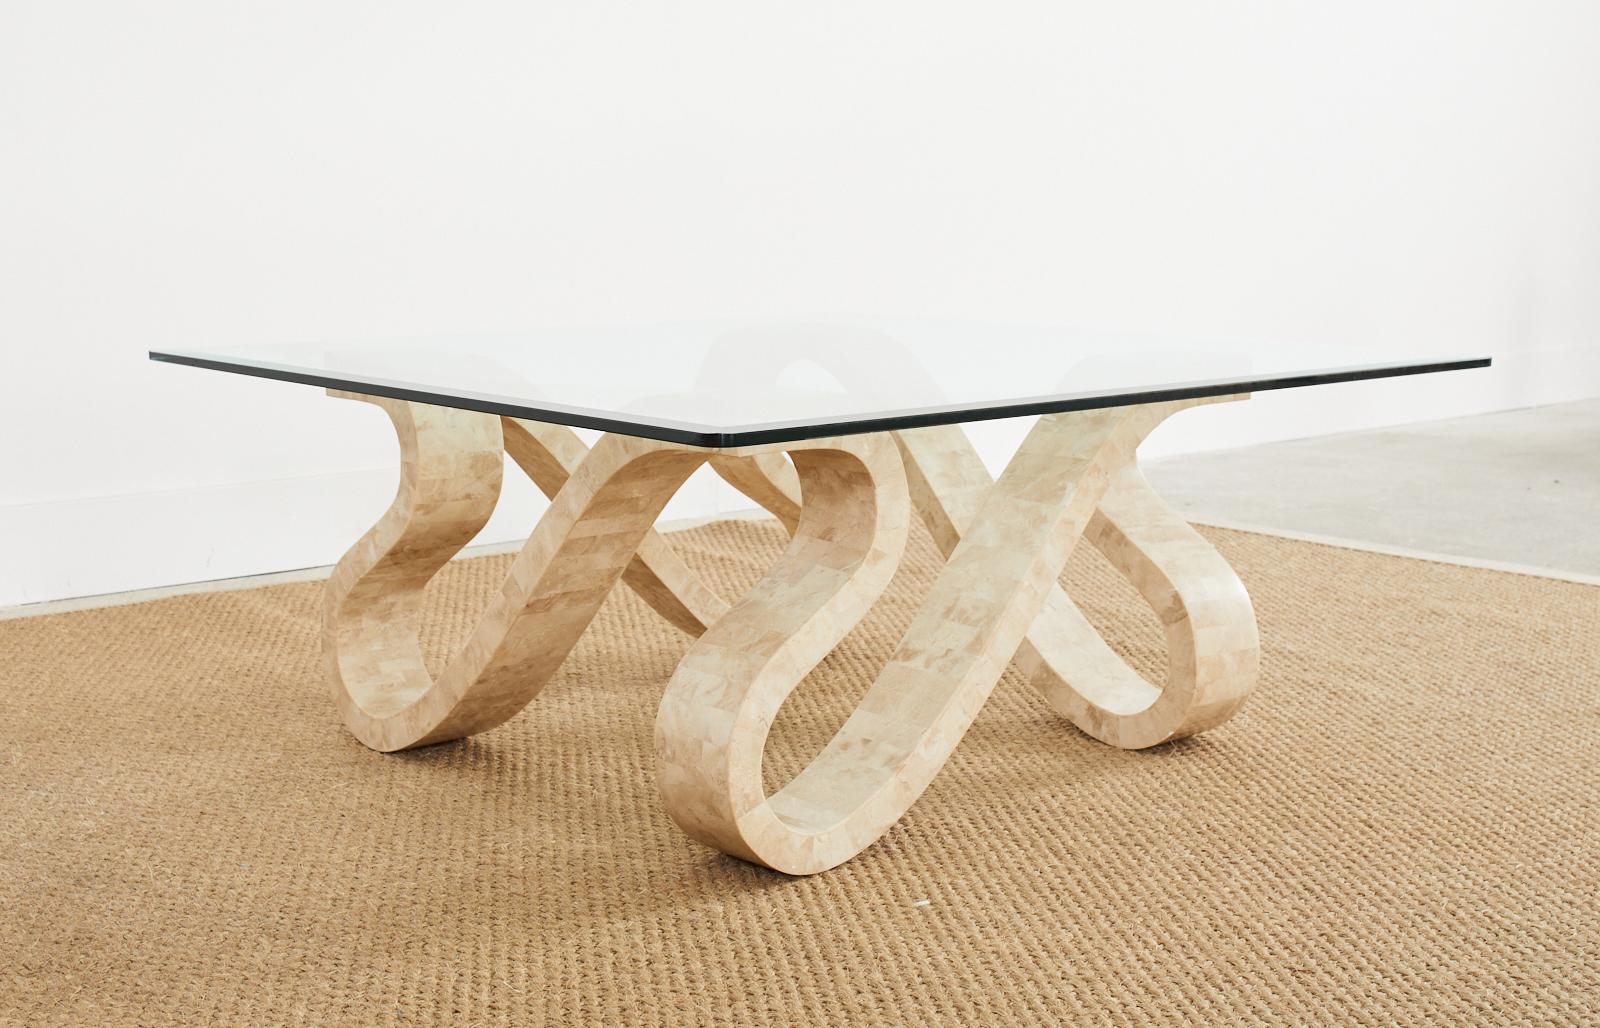 Beveled Maitland Smith Modernist Sculptural Tessellated Stone Cocktail Table